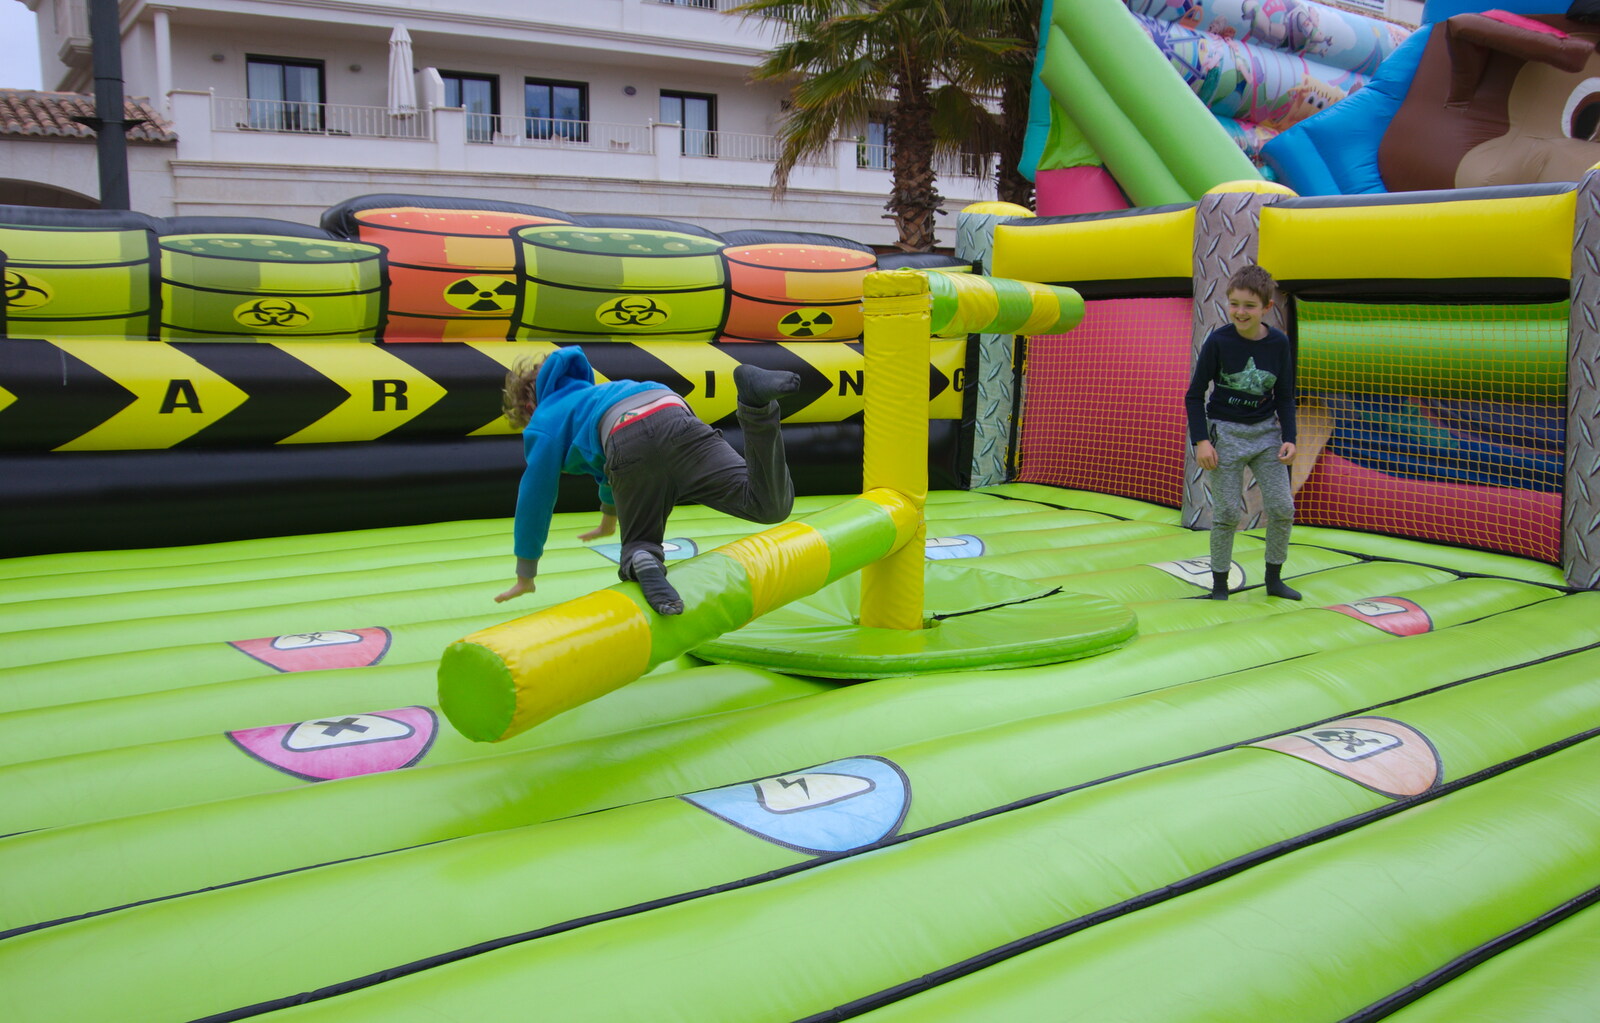 The boys mess around on a bouncy castle from An Easter Parade, Nerja, Andalusia, Spain - 21st April 2019